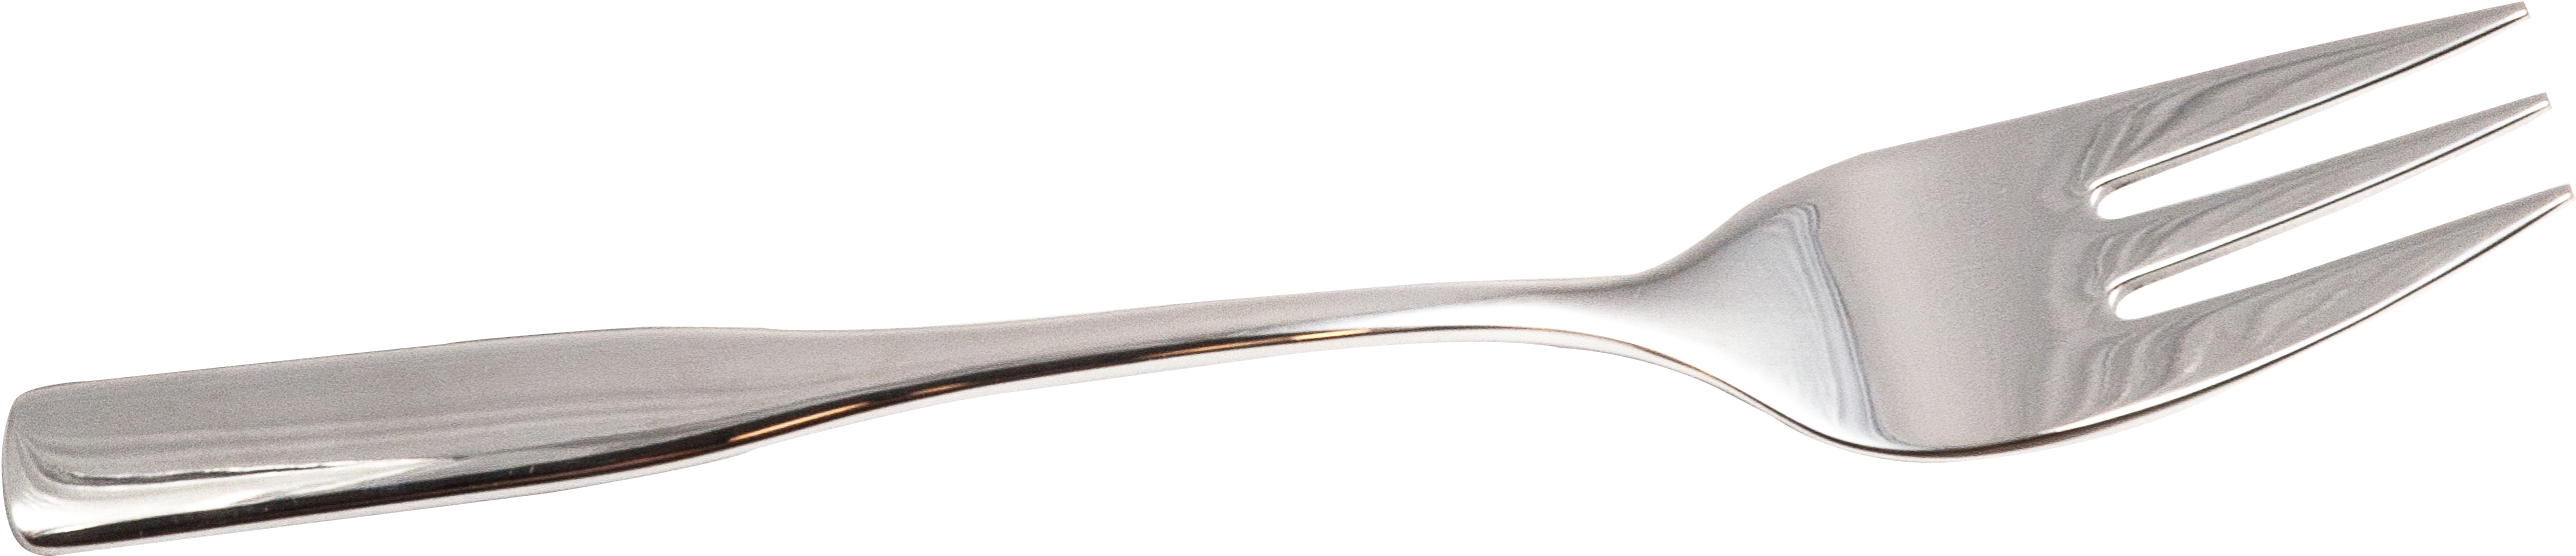 Span Miscellaneous Ricer Silver Spatula PNG